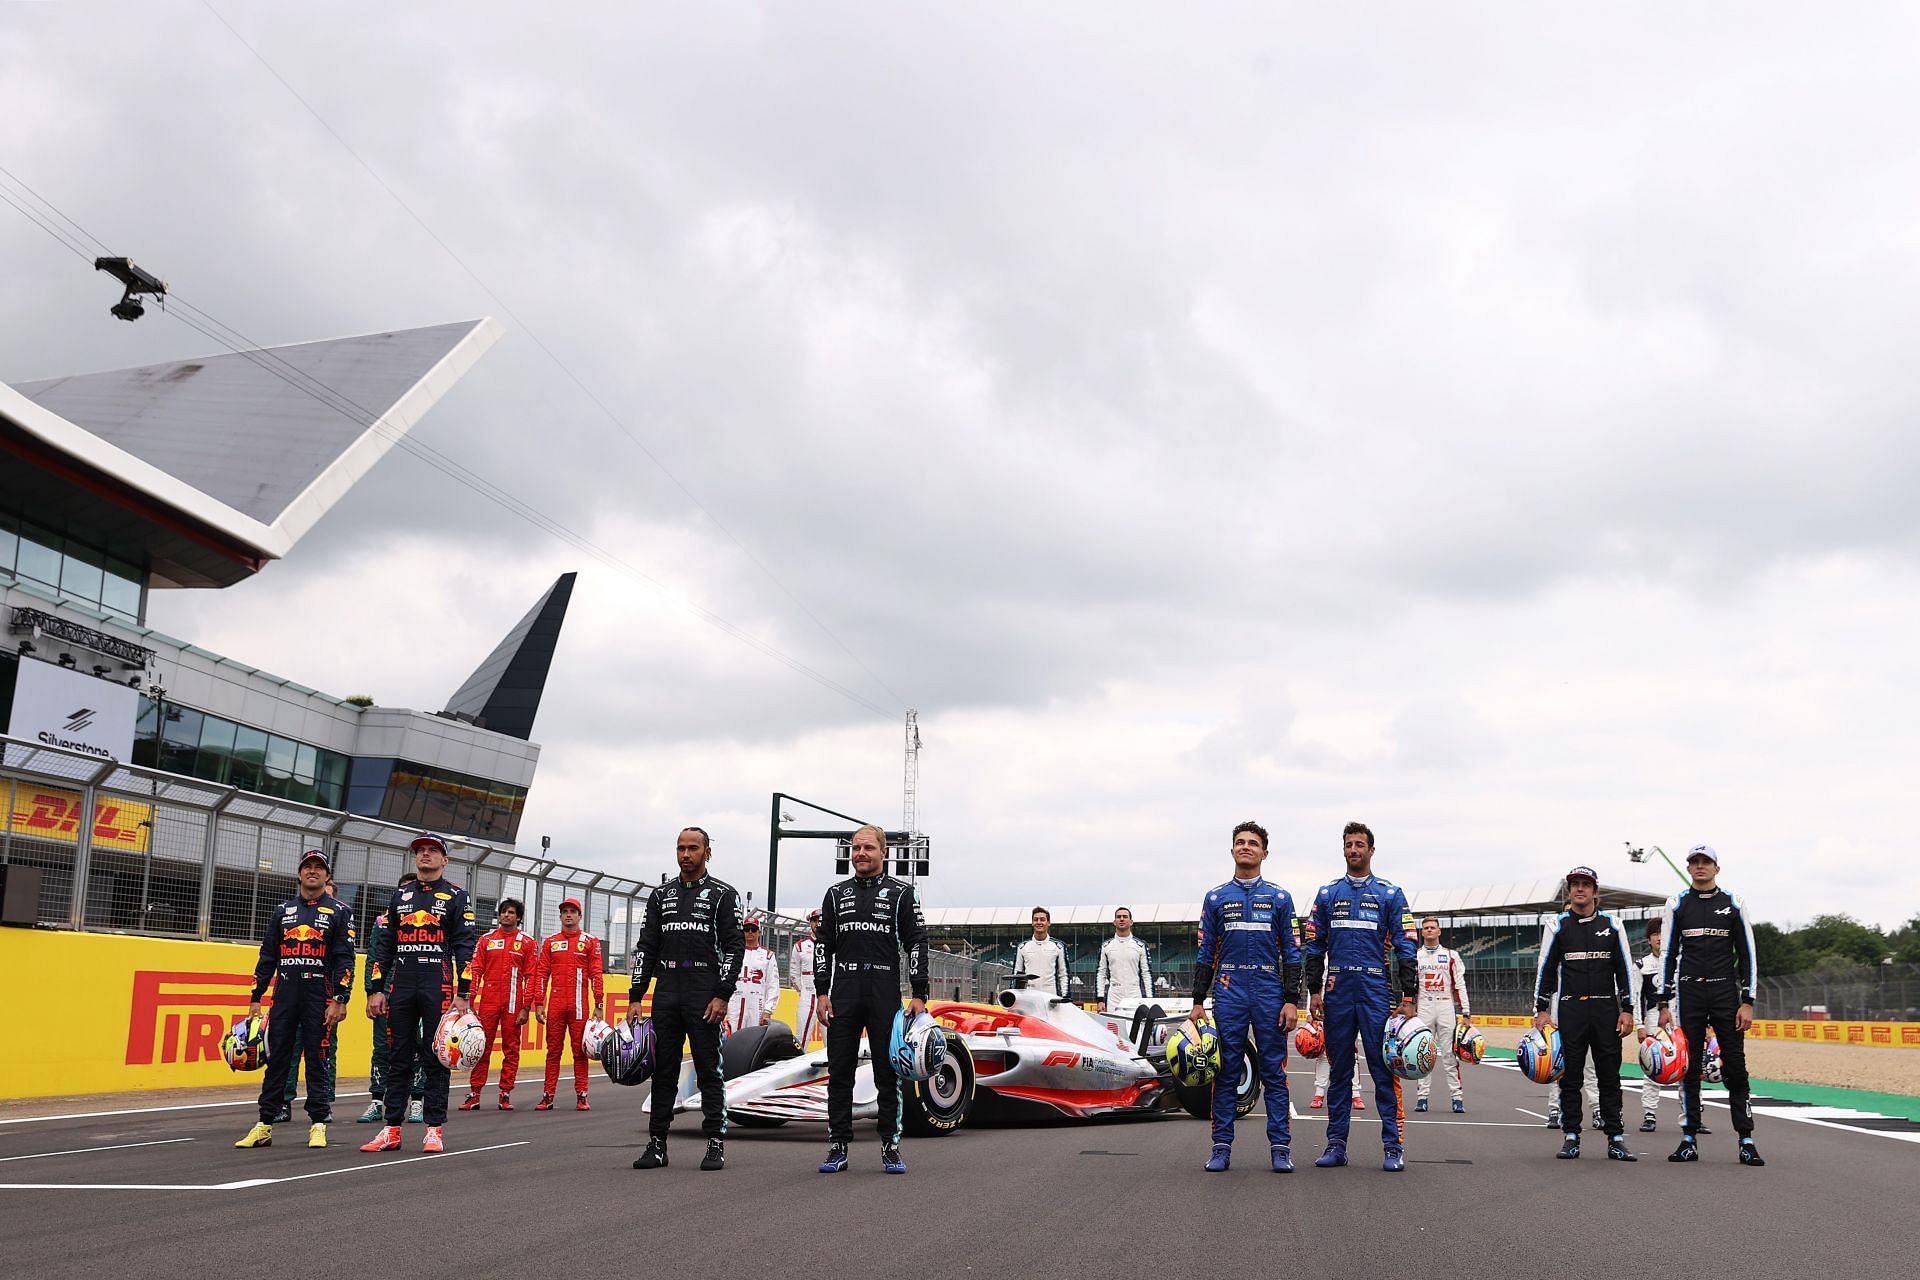 F1 Grand Prix of Great Britain - The grid gathers for the unveiling of the new car